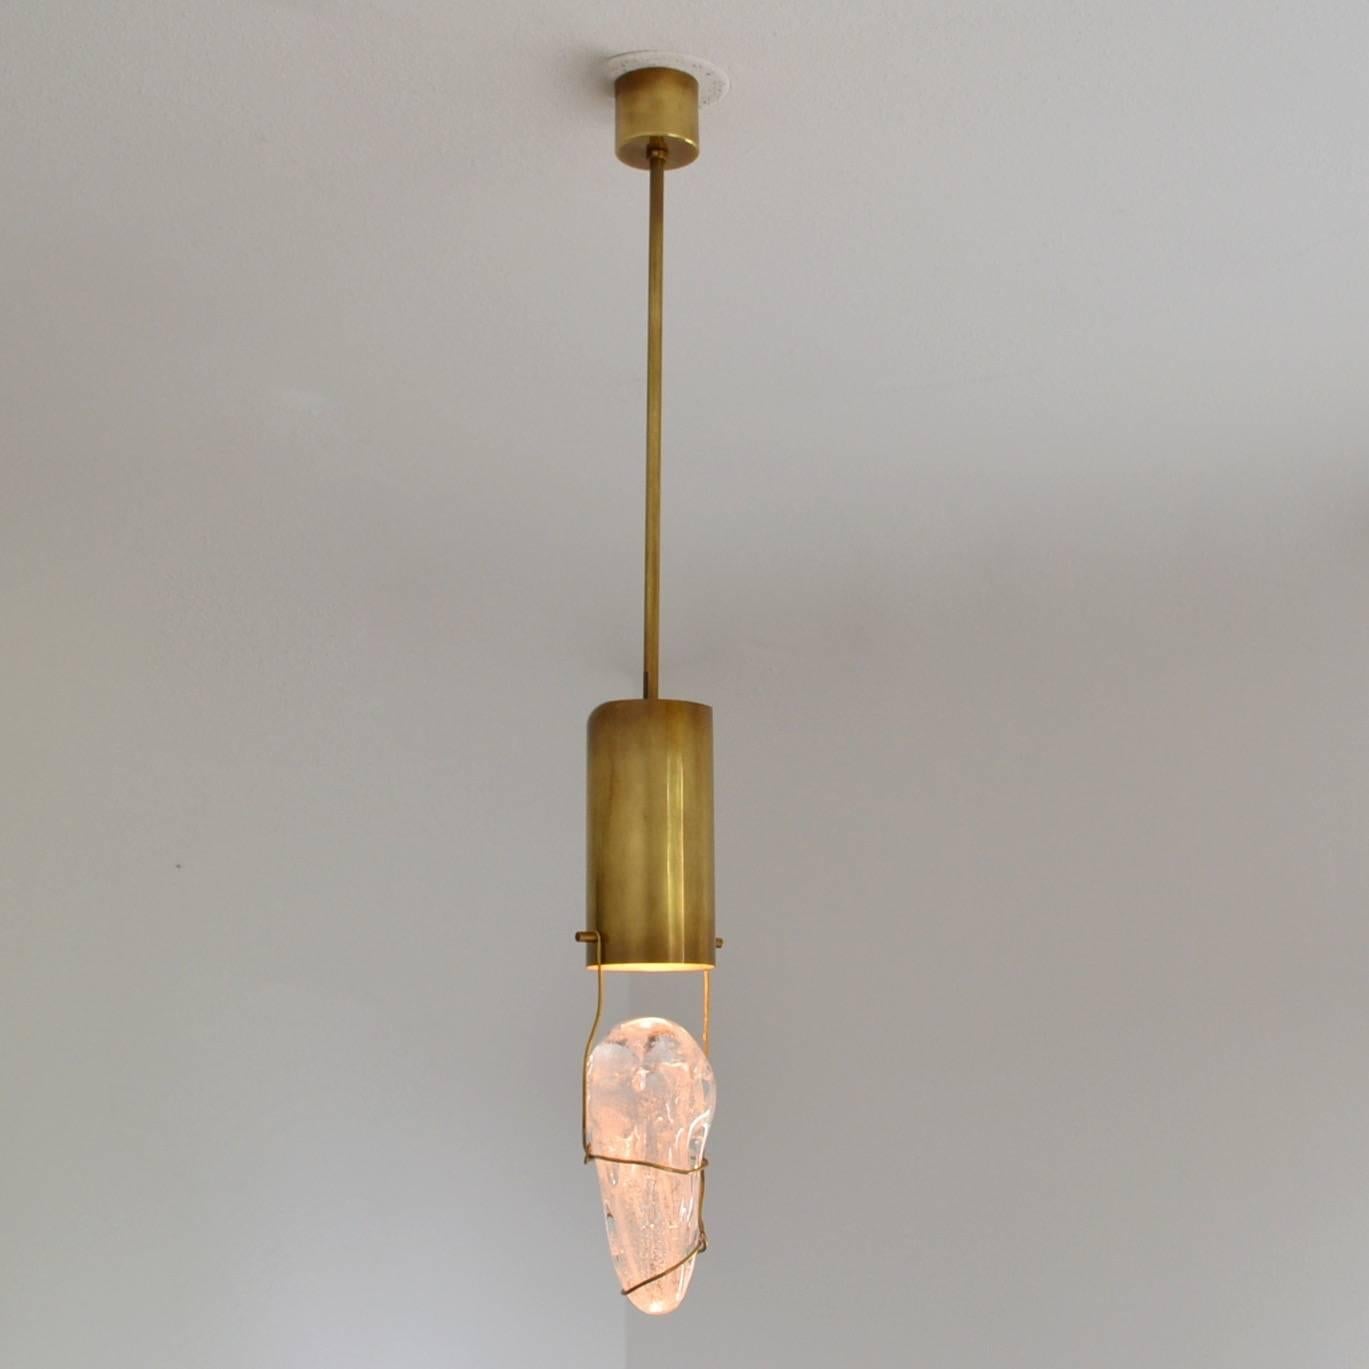 Pendant by Angelo Brotto manufactured by Esperia, circa 1980.
Dimension of the glass element 10 in /23 cm.
Two pendants are available.